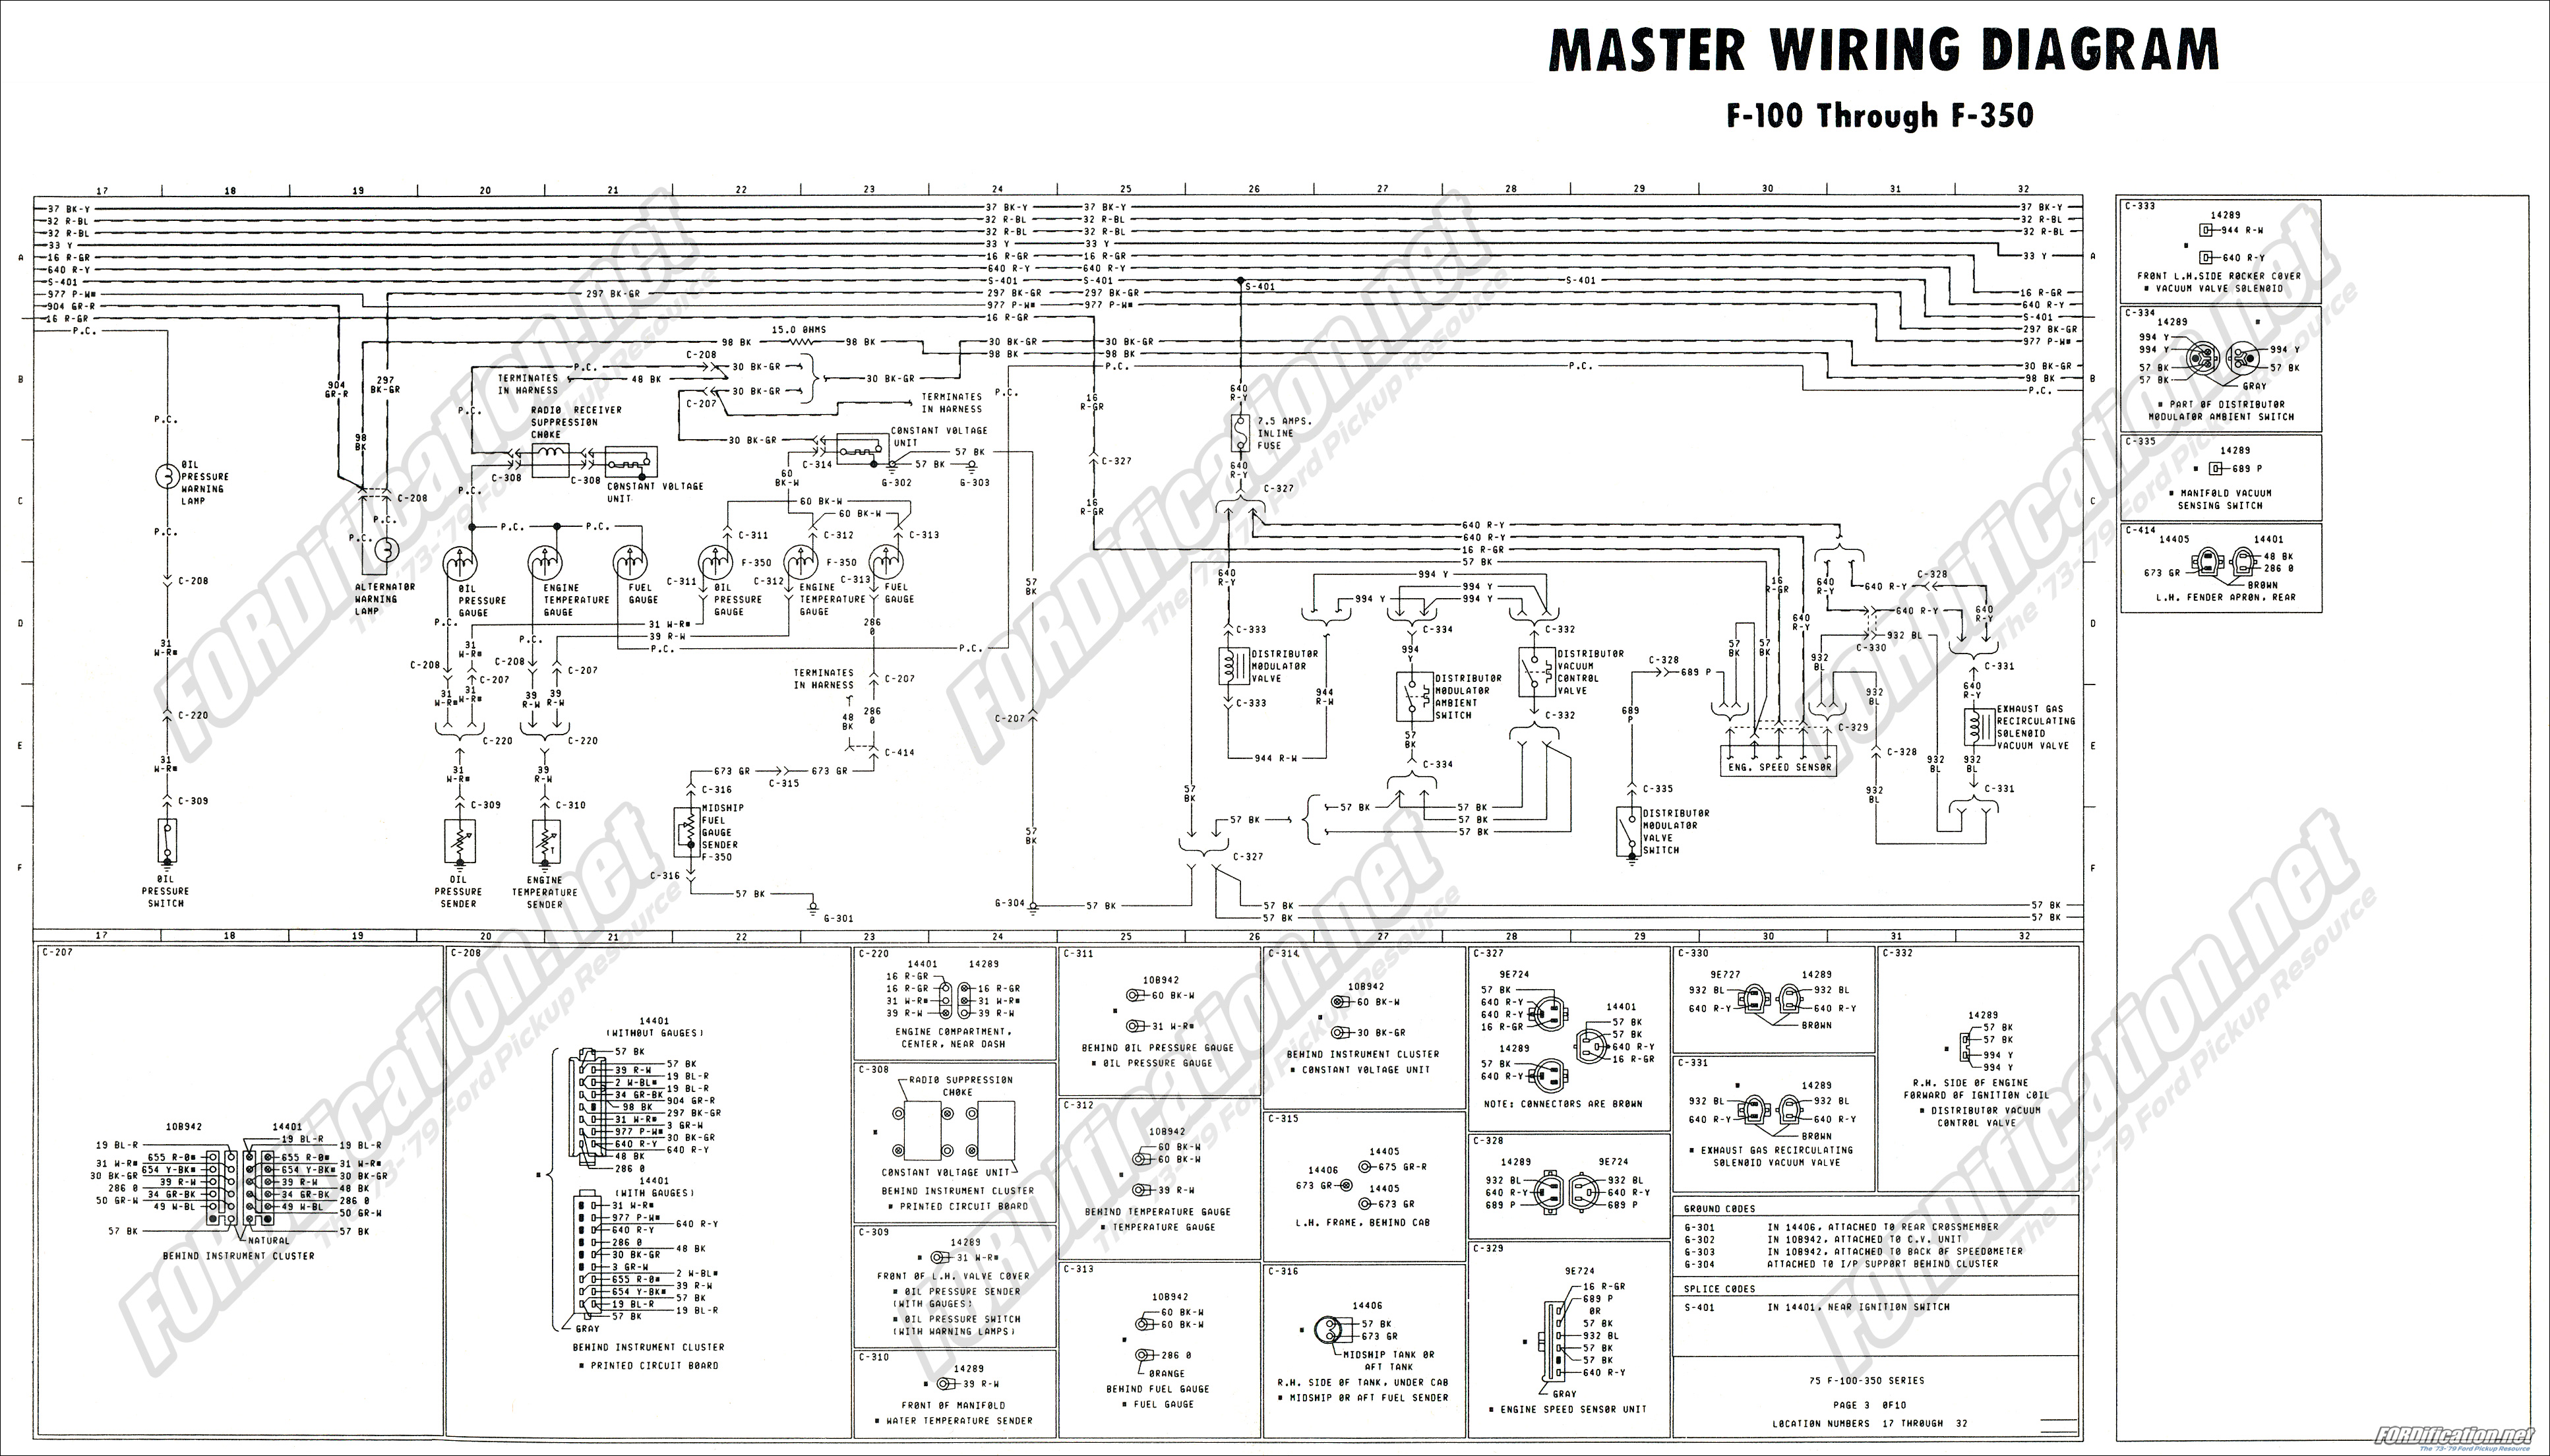 1973 1979 Ford Truck Wiring Diagrams, 1979 Ford F150 Fuel Gauge Wiring Diagram